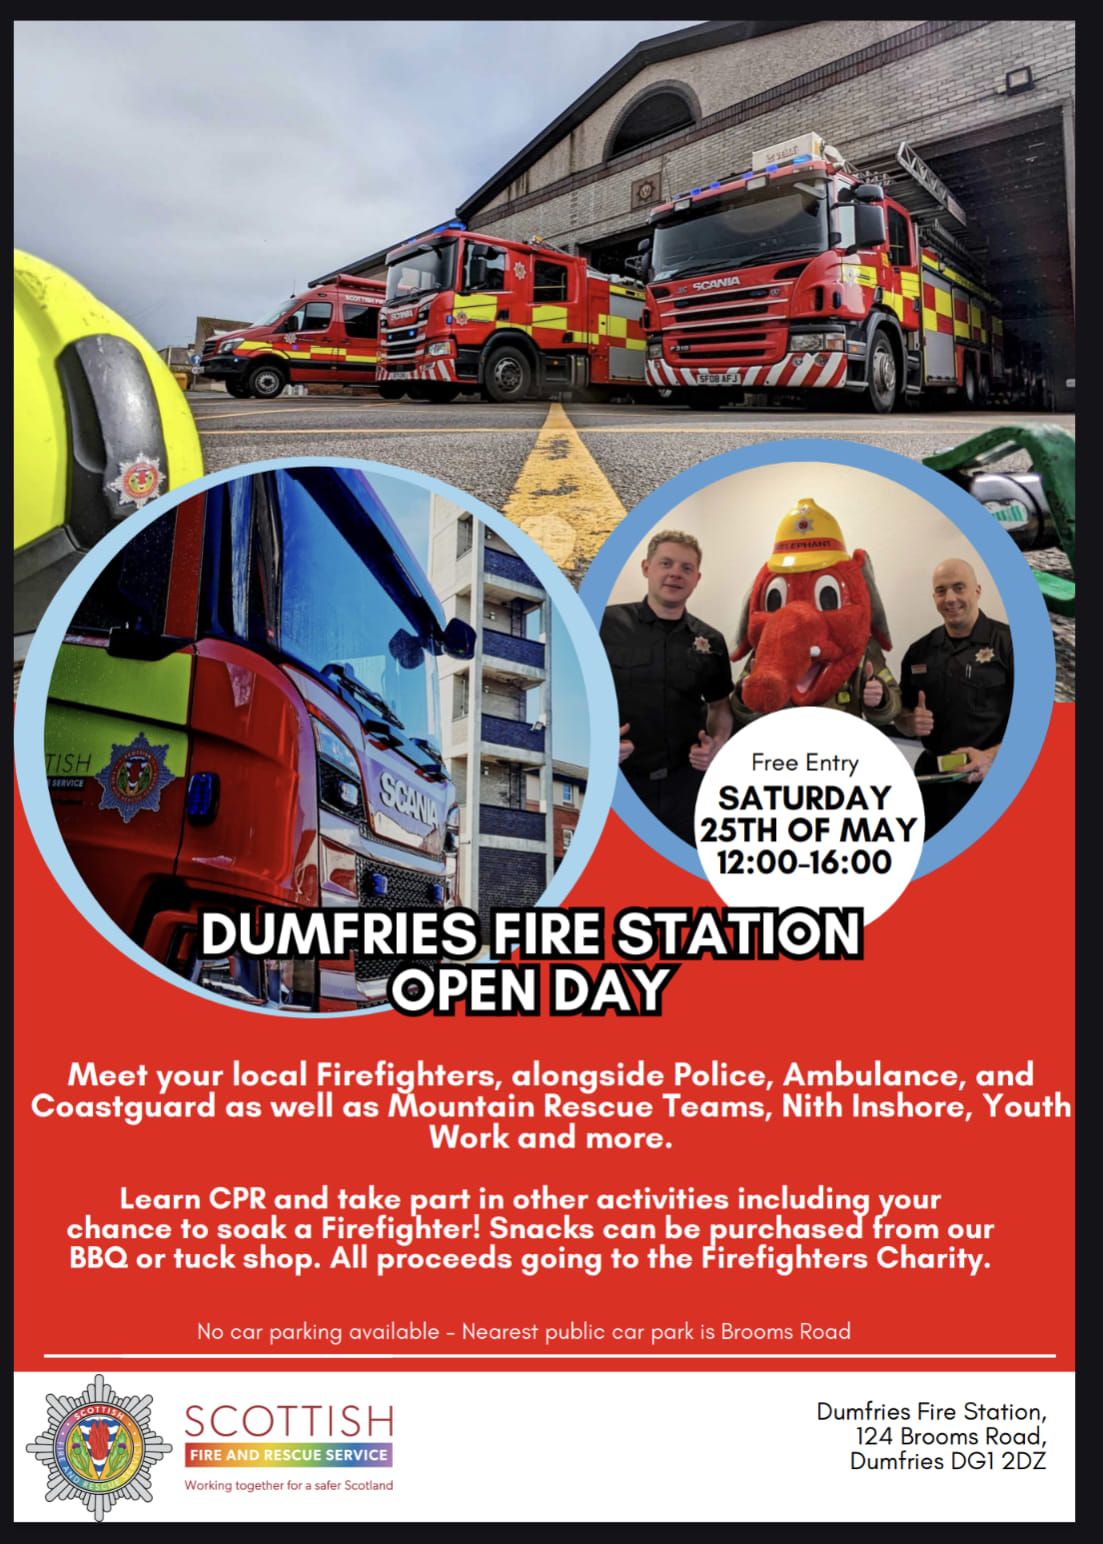 DUMFRIES FIRE STATION OPEN DAY